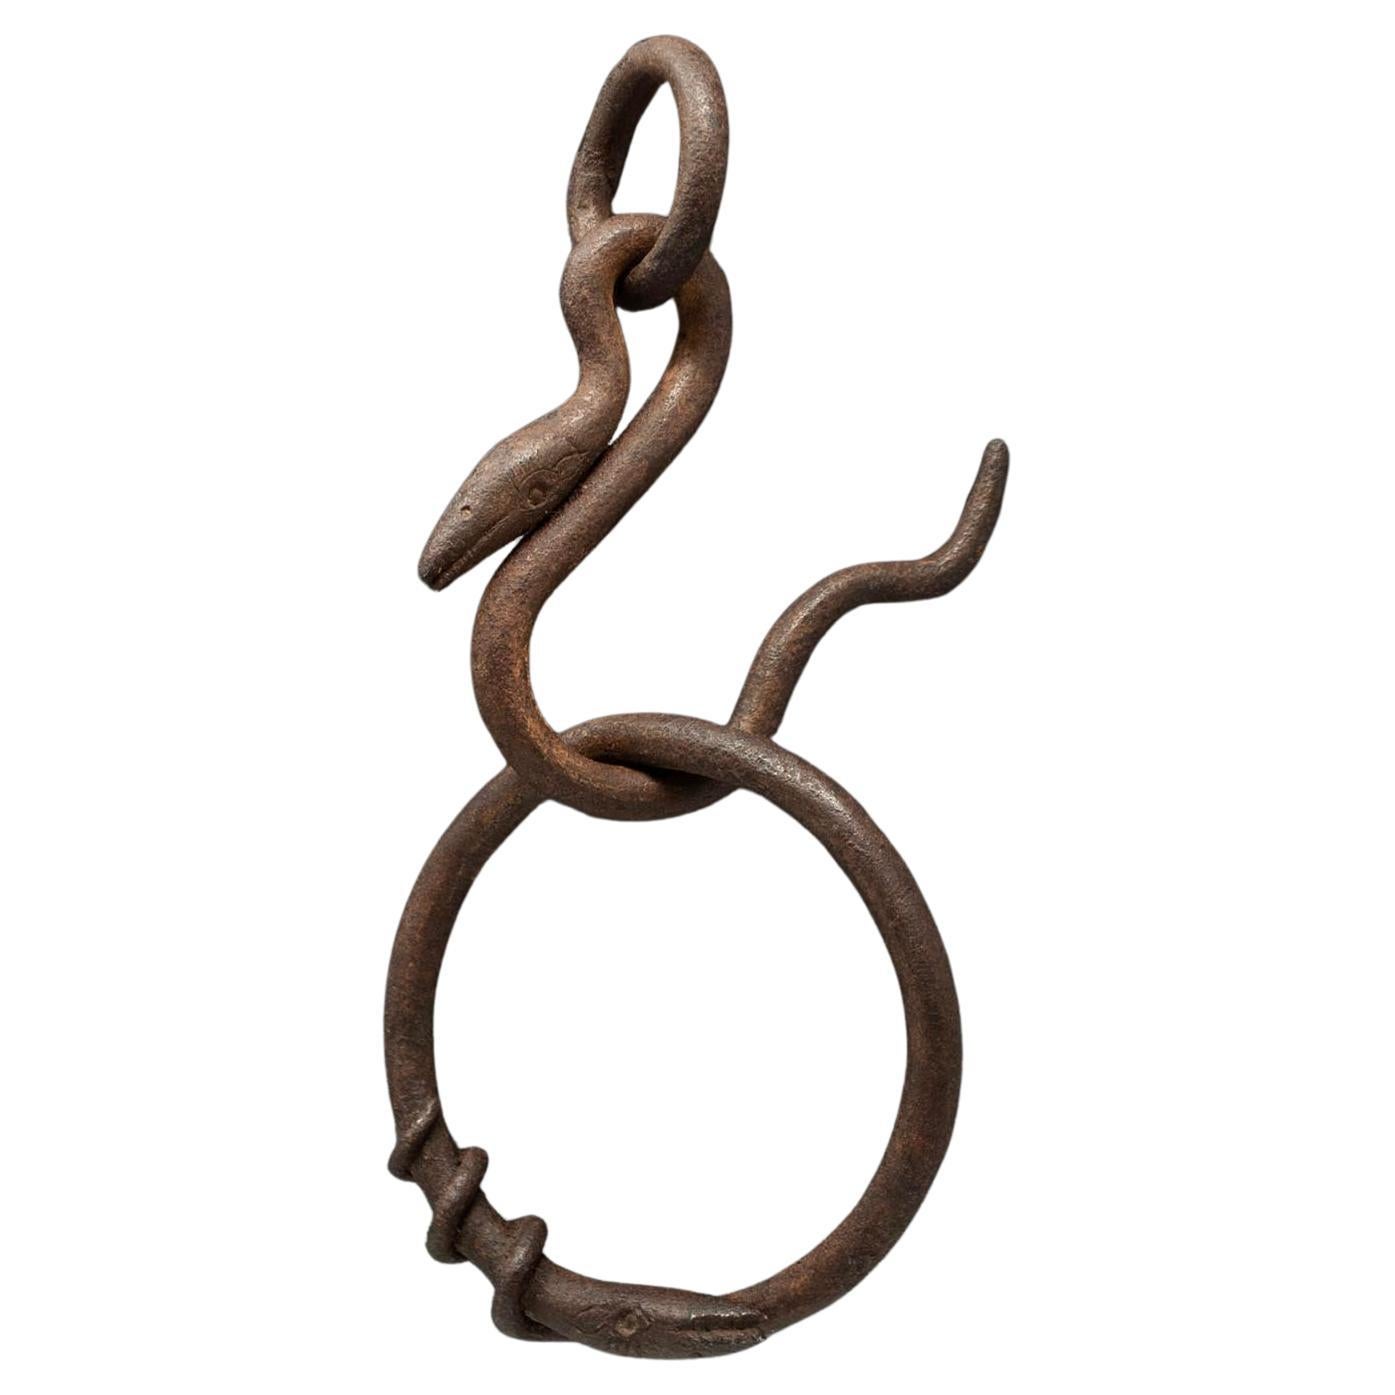 19th-Early 20th Century Tantric Hook and Snare, Nepal For Sale